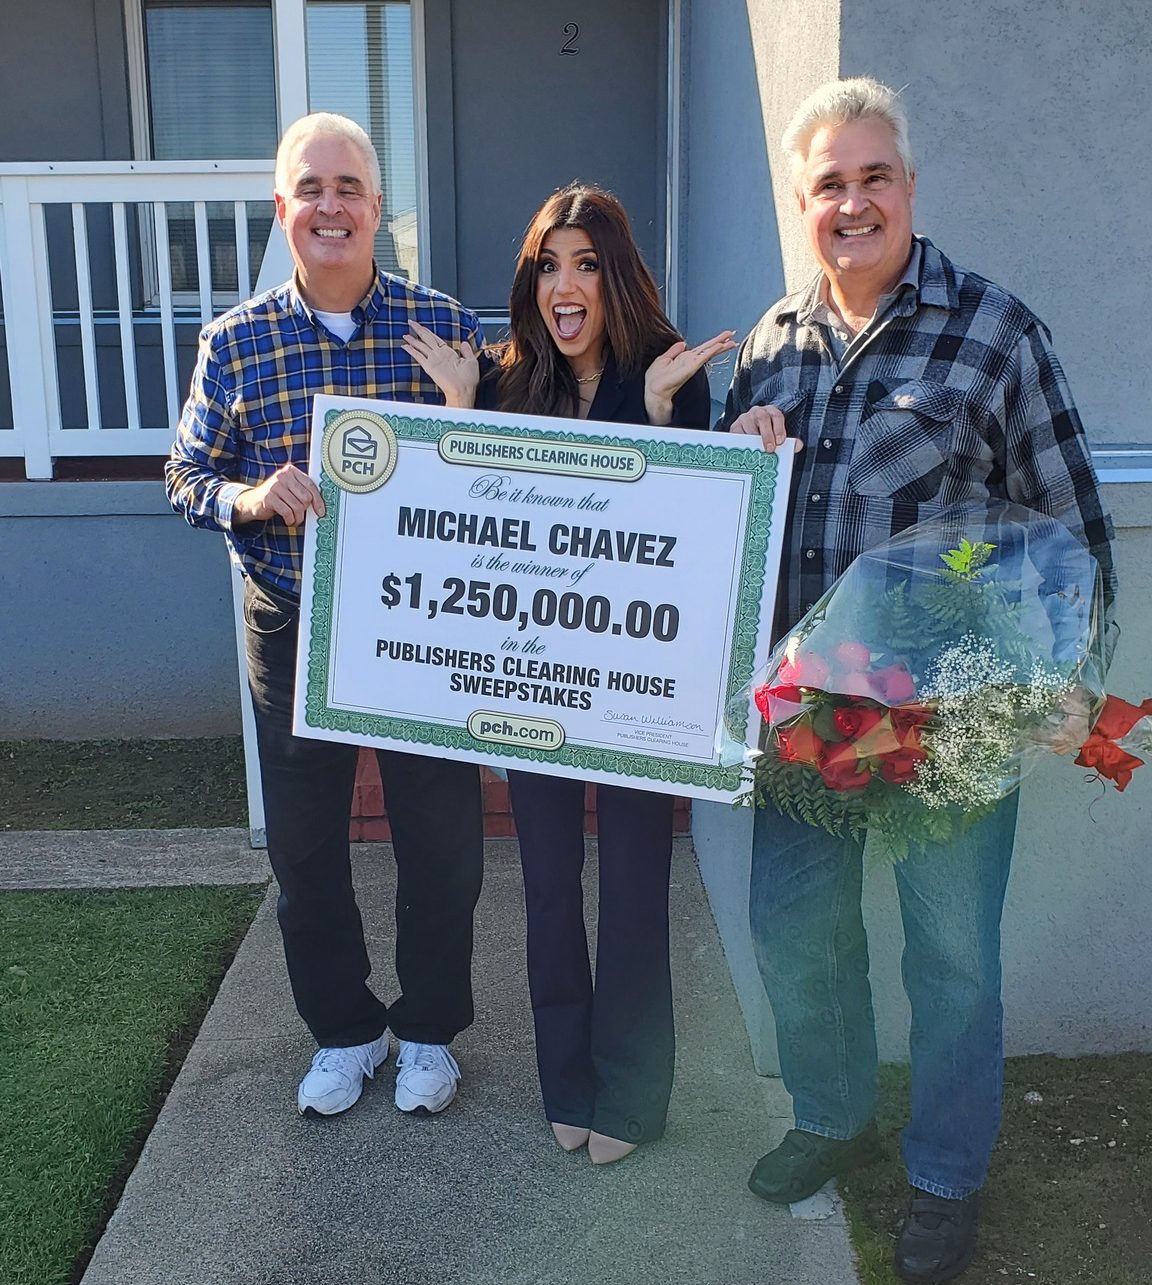 #WinnerWednesday: This PCH Winner Won A Big Check For $1,250,000!